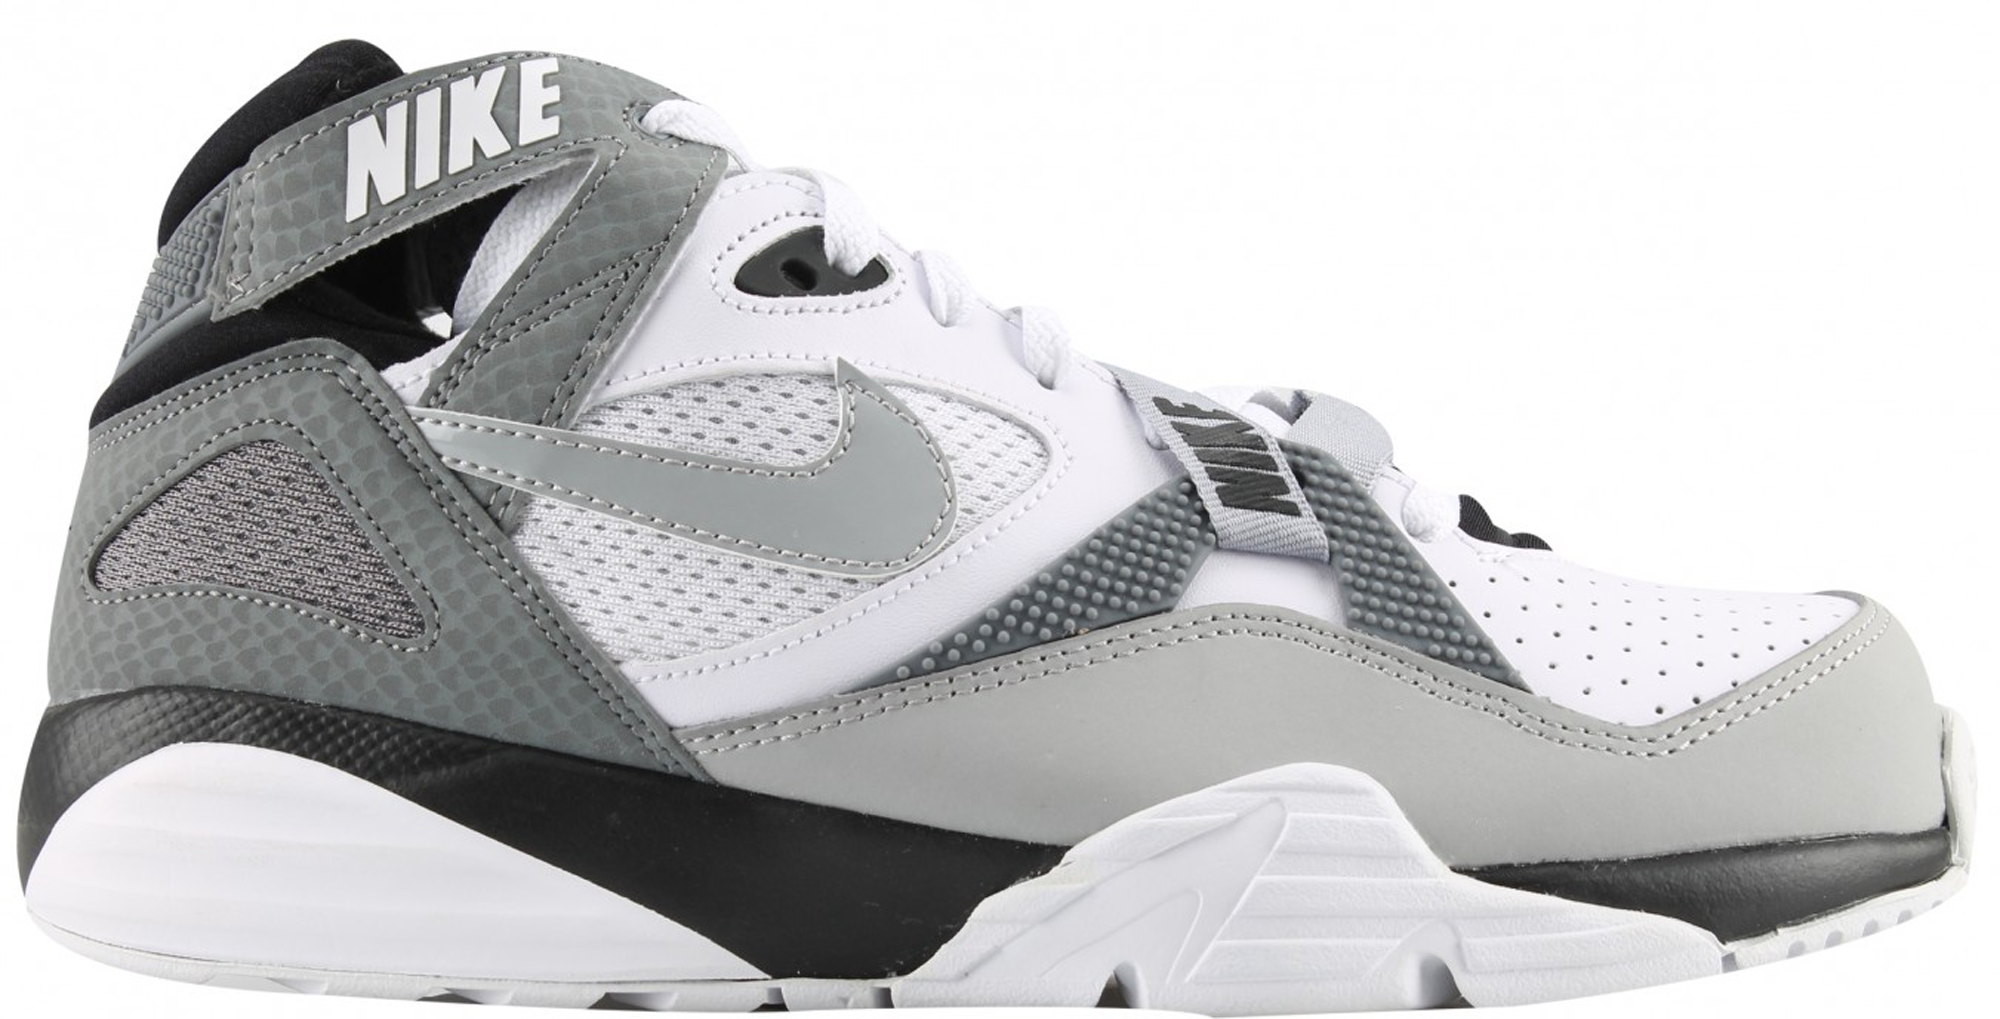 Nike Air Trainer SC High Raiders On feet at Exclucity 